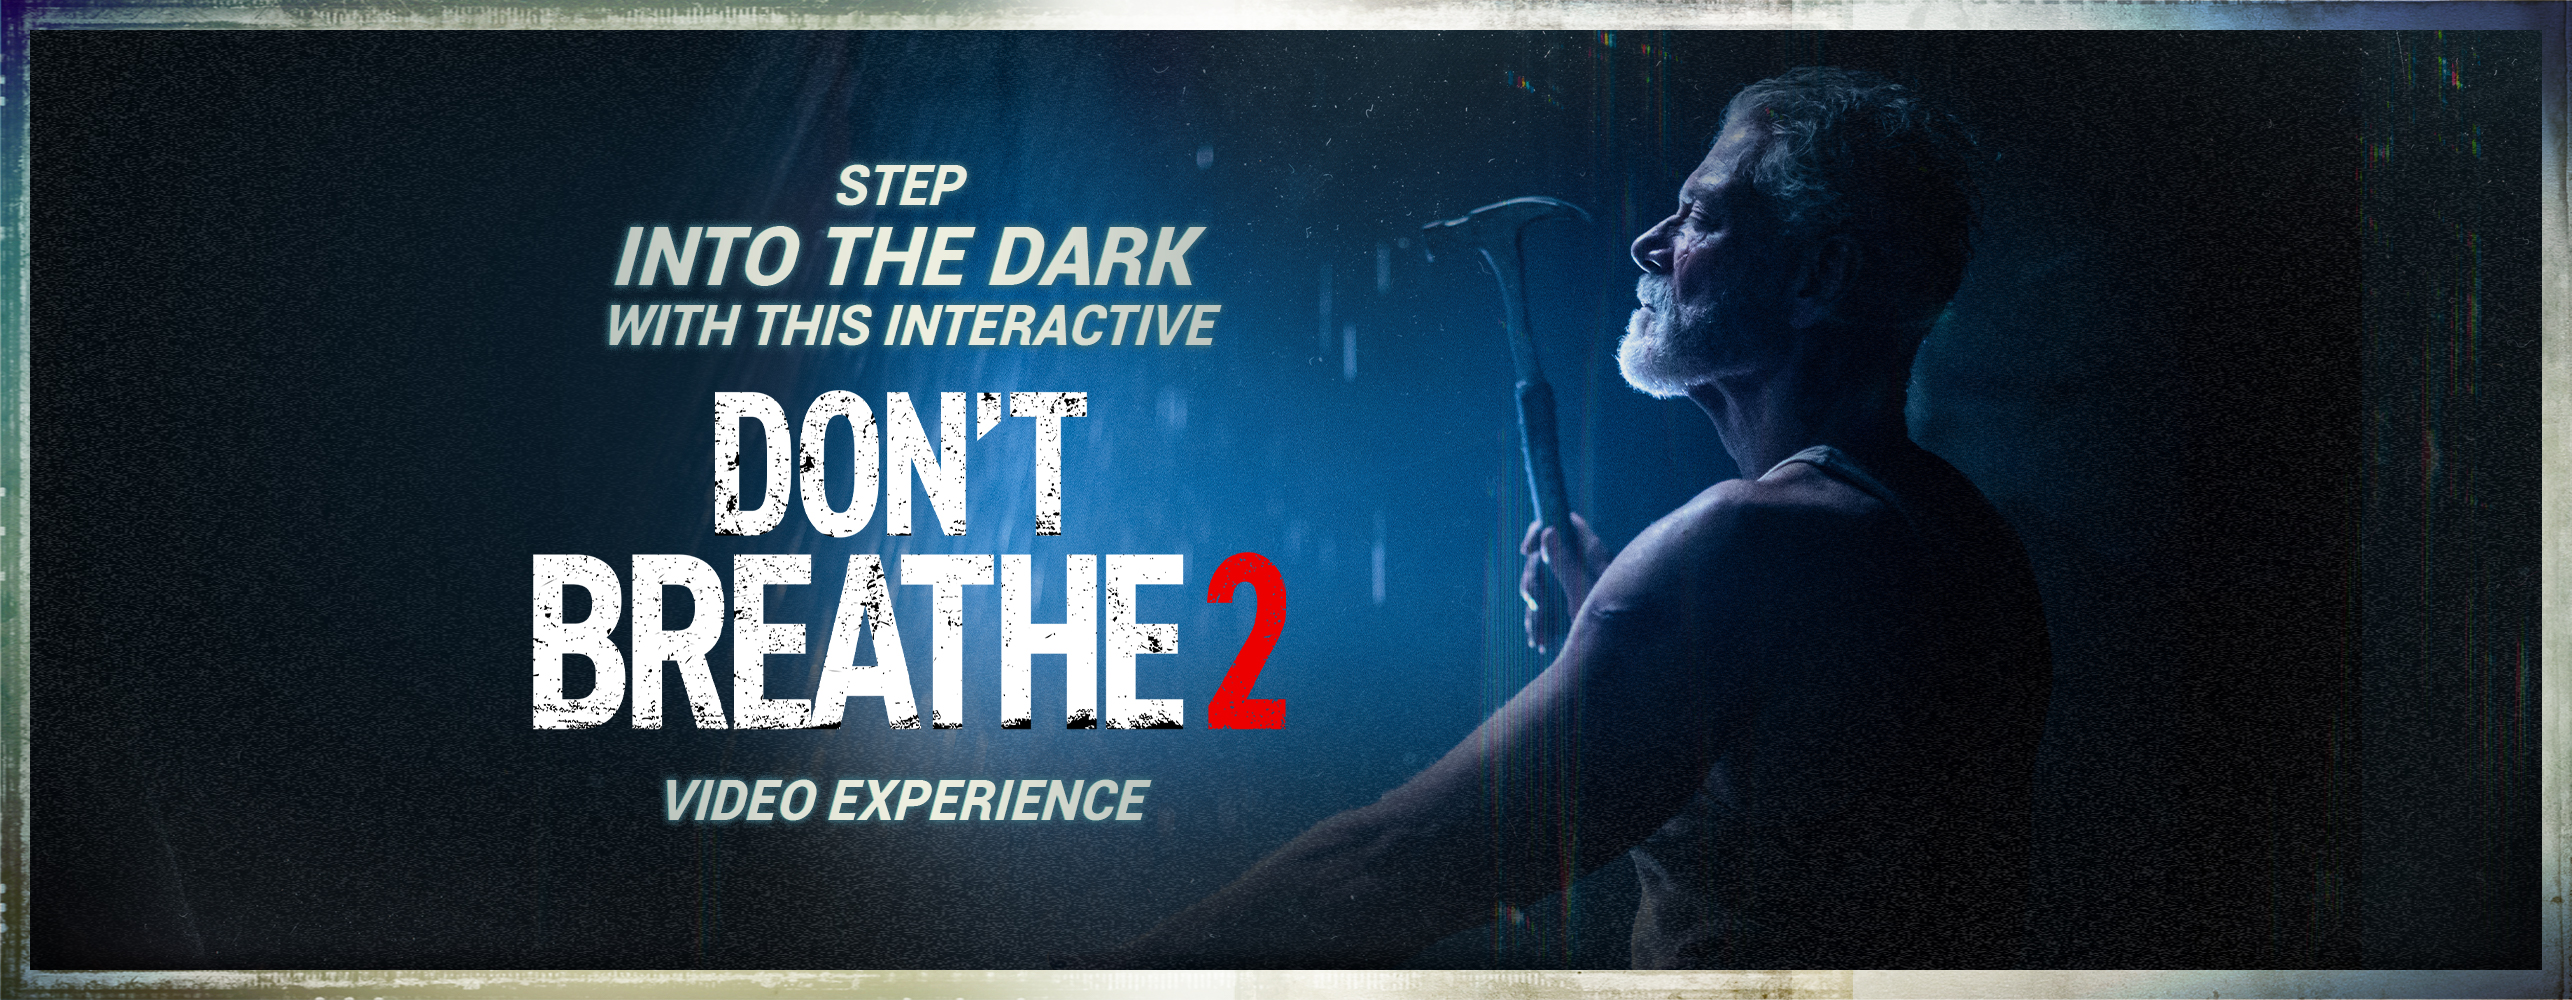 Step Into the Dark with this Interactive Don't Breathe 2 Video Experience